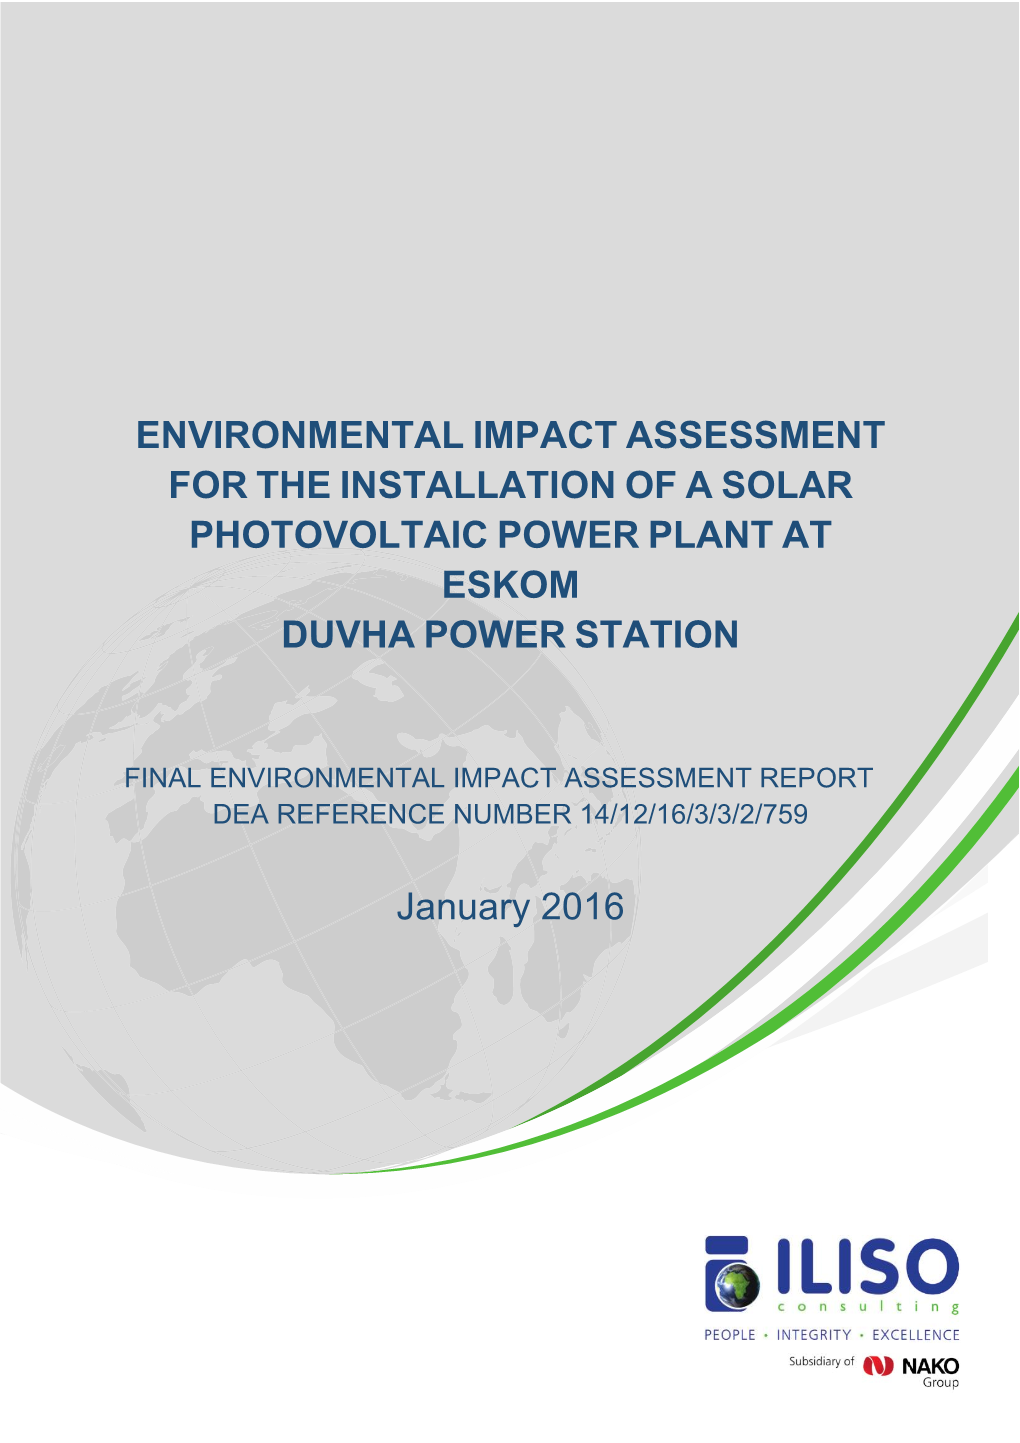 Environmental Impact Assessment for the Installation of a Solar Photovoltaic Power Plant at Eskom Duvha Power Station